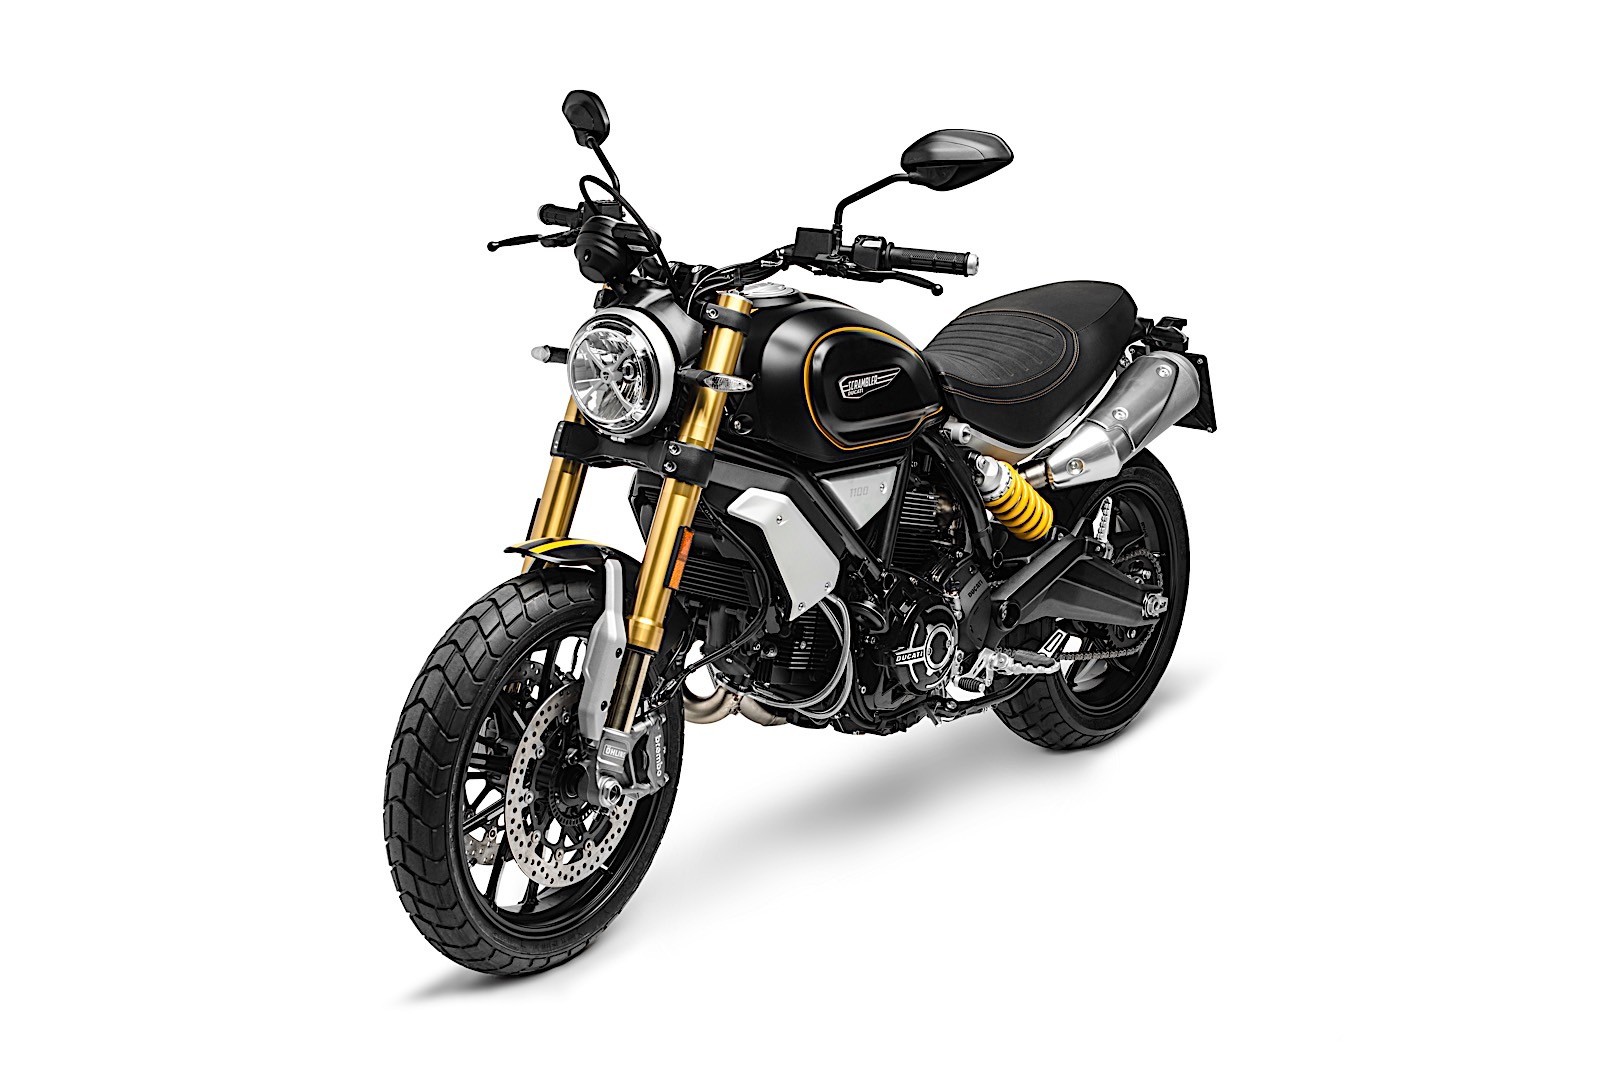 2018 Ducati Scrambler 1100 Is Out To Play With The Big Boys at EICMA ...